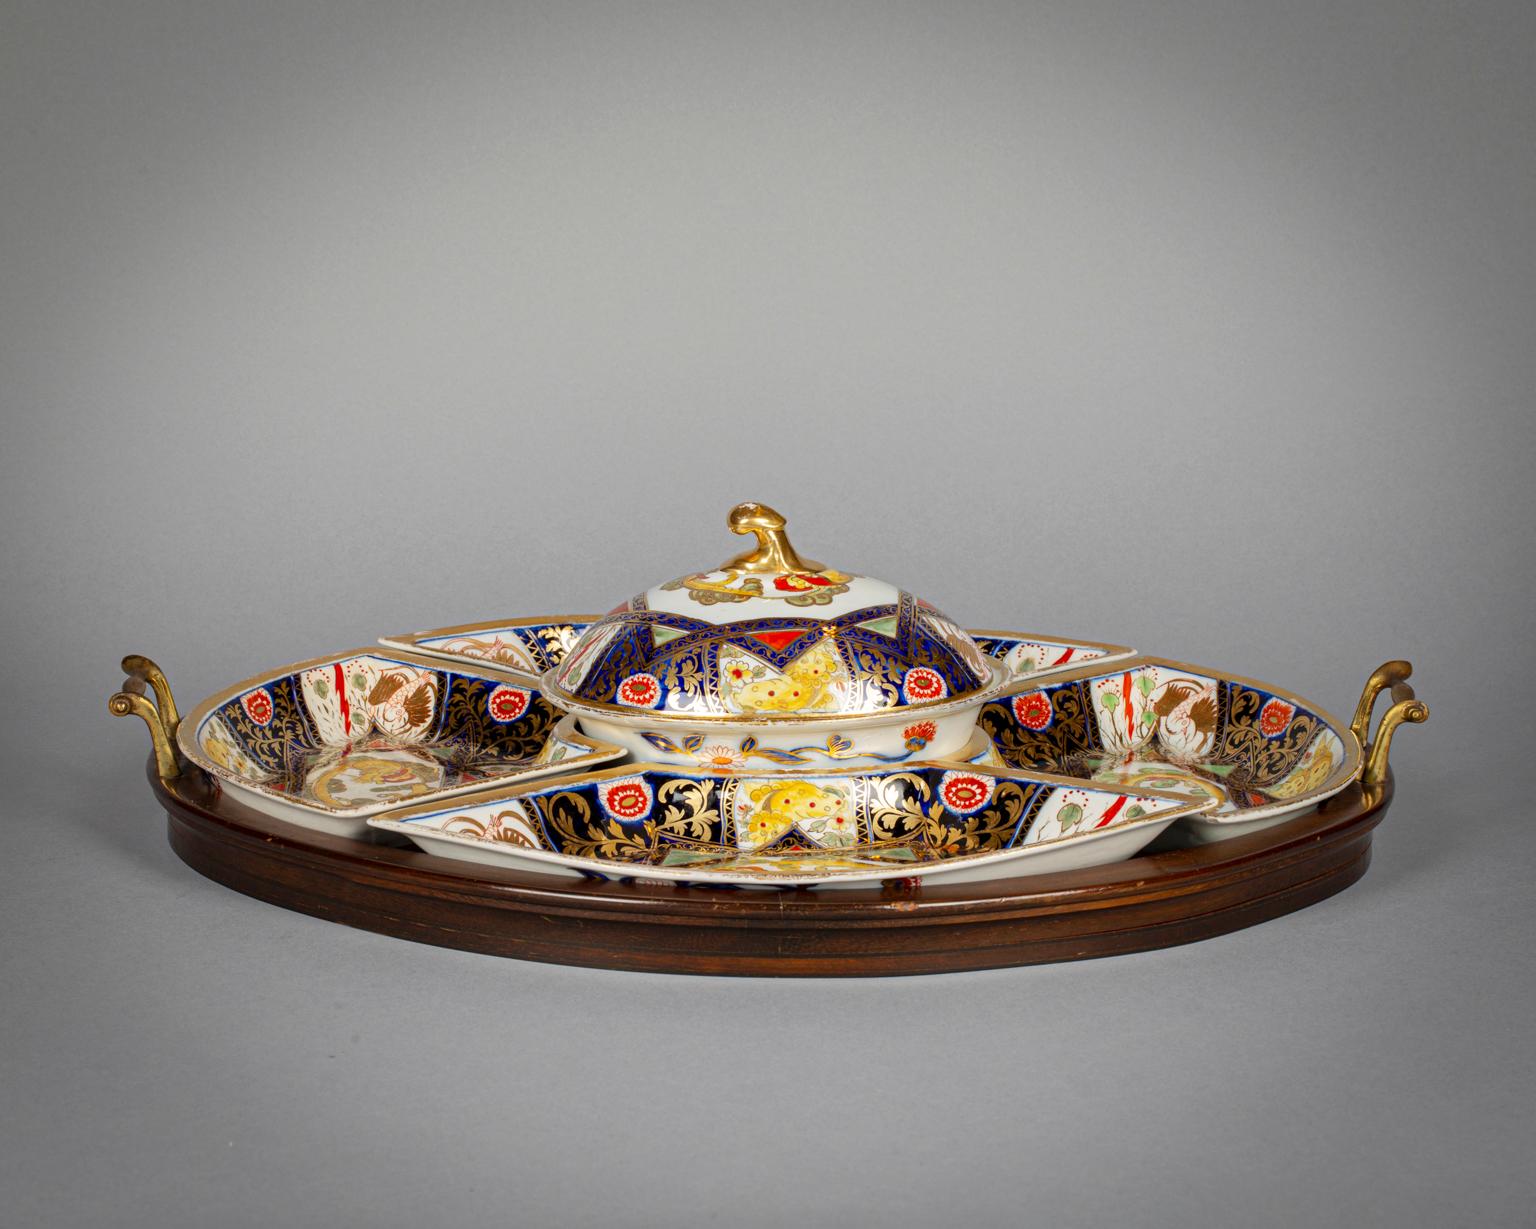 Painted in a variation of the dragon-in-compartment pattern in Imari colors. Consisting of four dishes surrounding a covered tureen resting on a wooden and brass-handled tray. Chamberlain Worcester or Coalport.